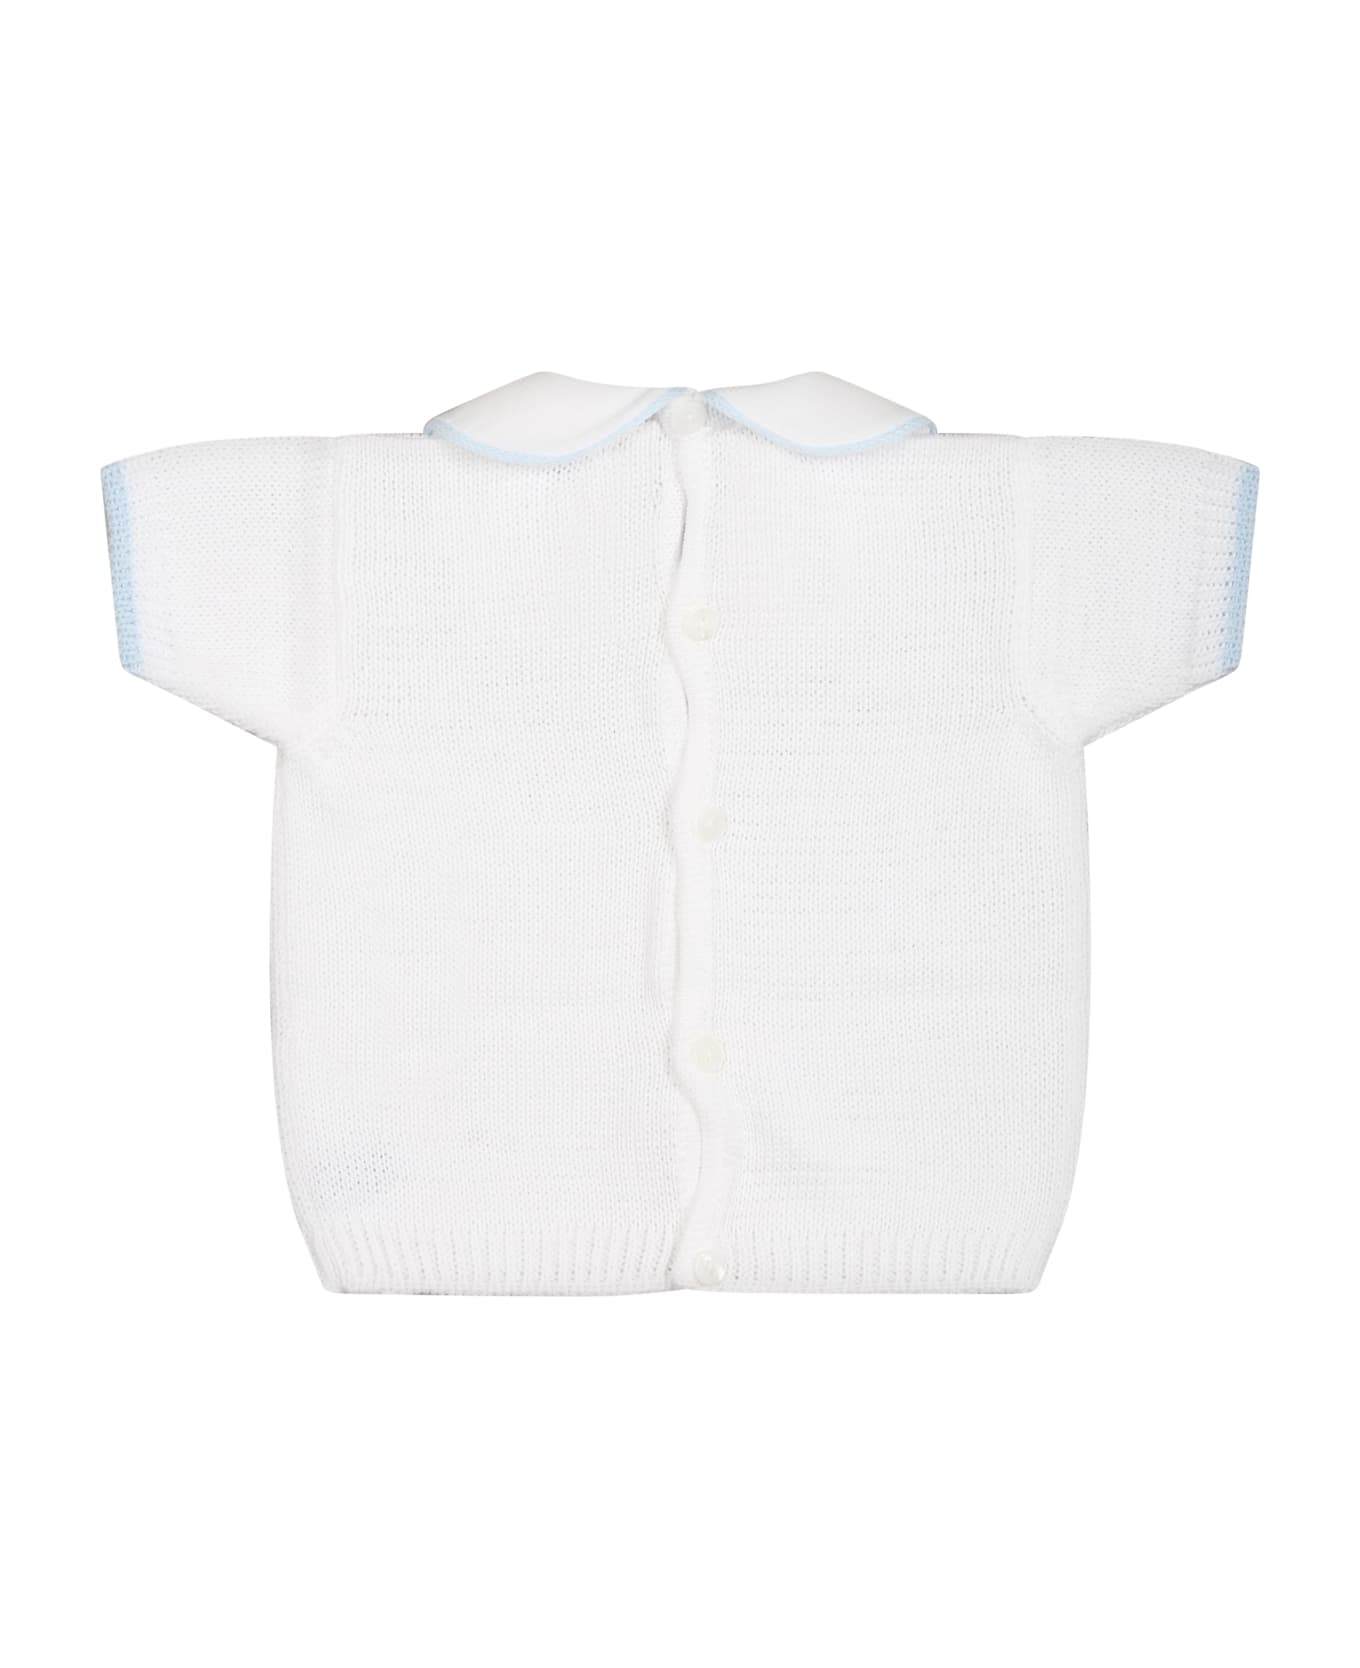 Little Bear White Sweater For Baby Boy With Light Blue Polka Dots - White